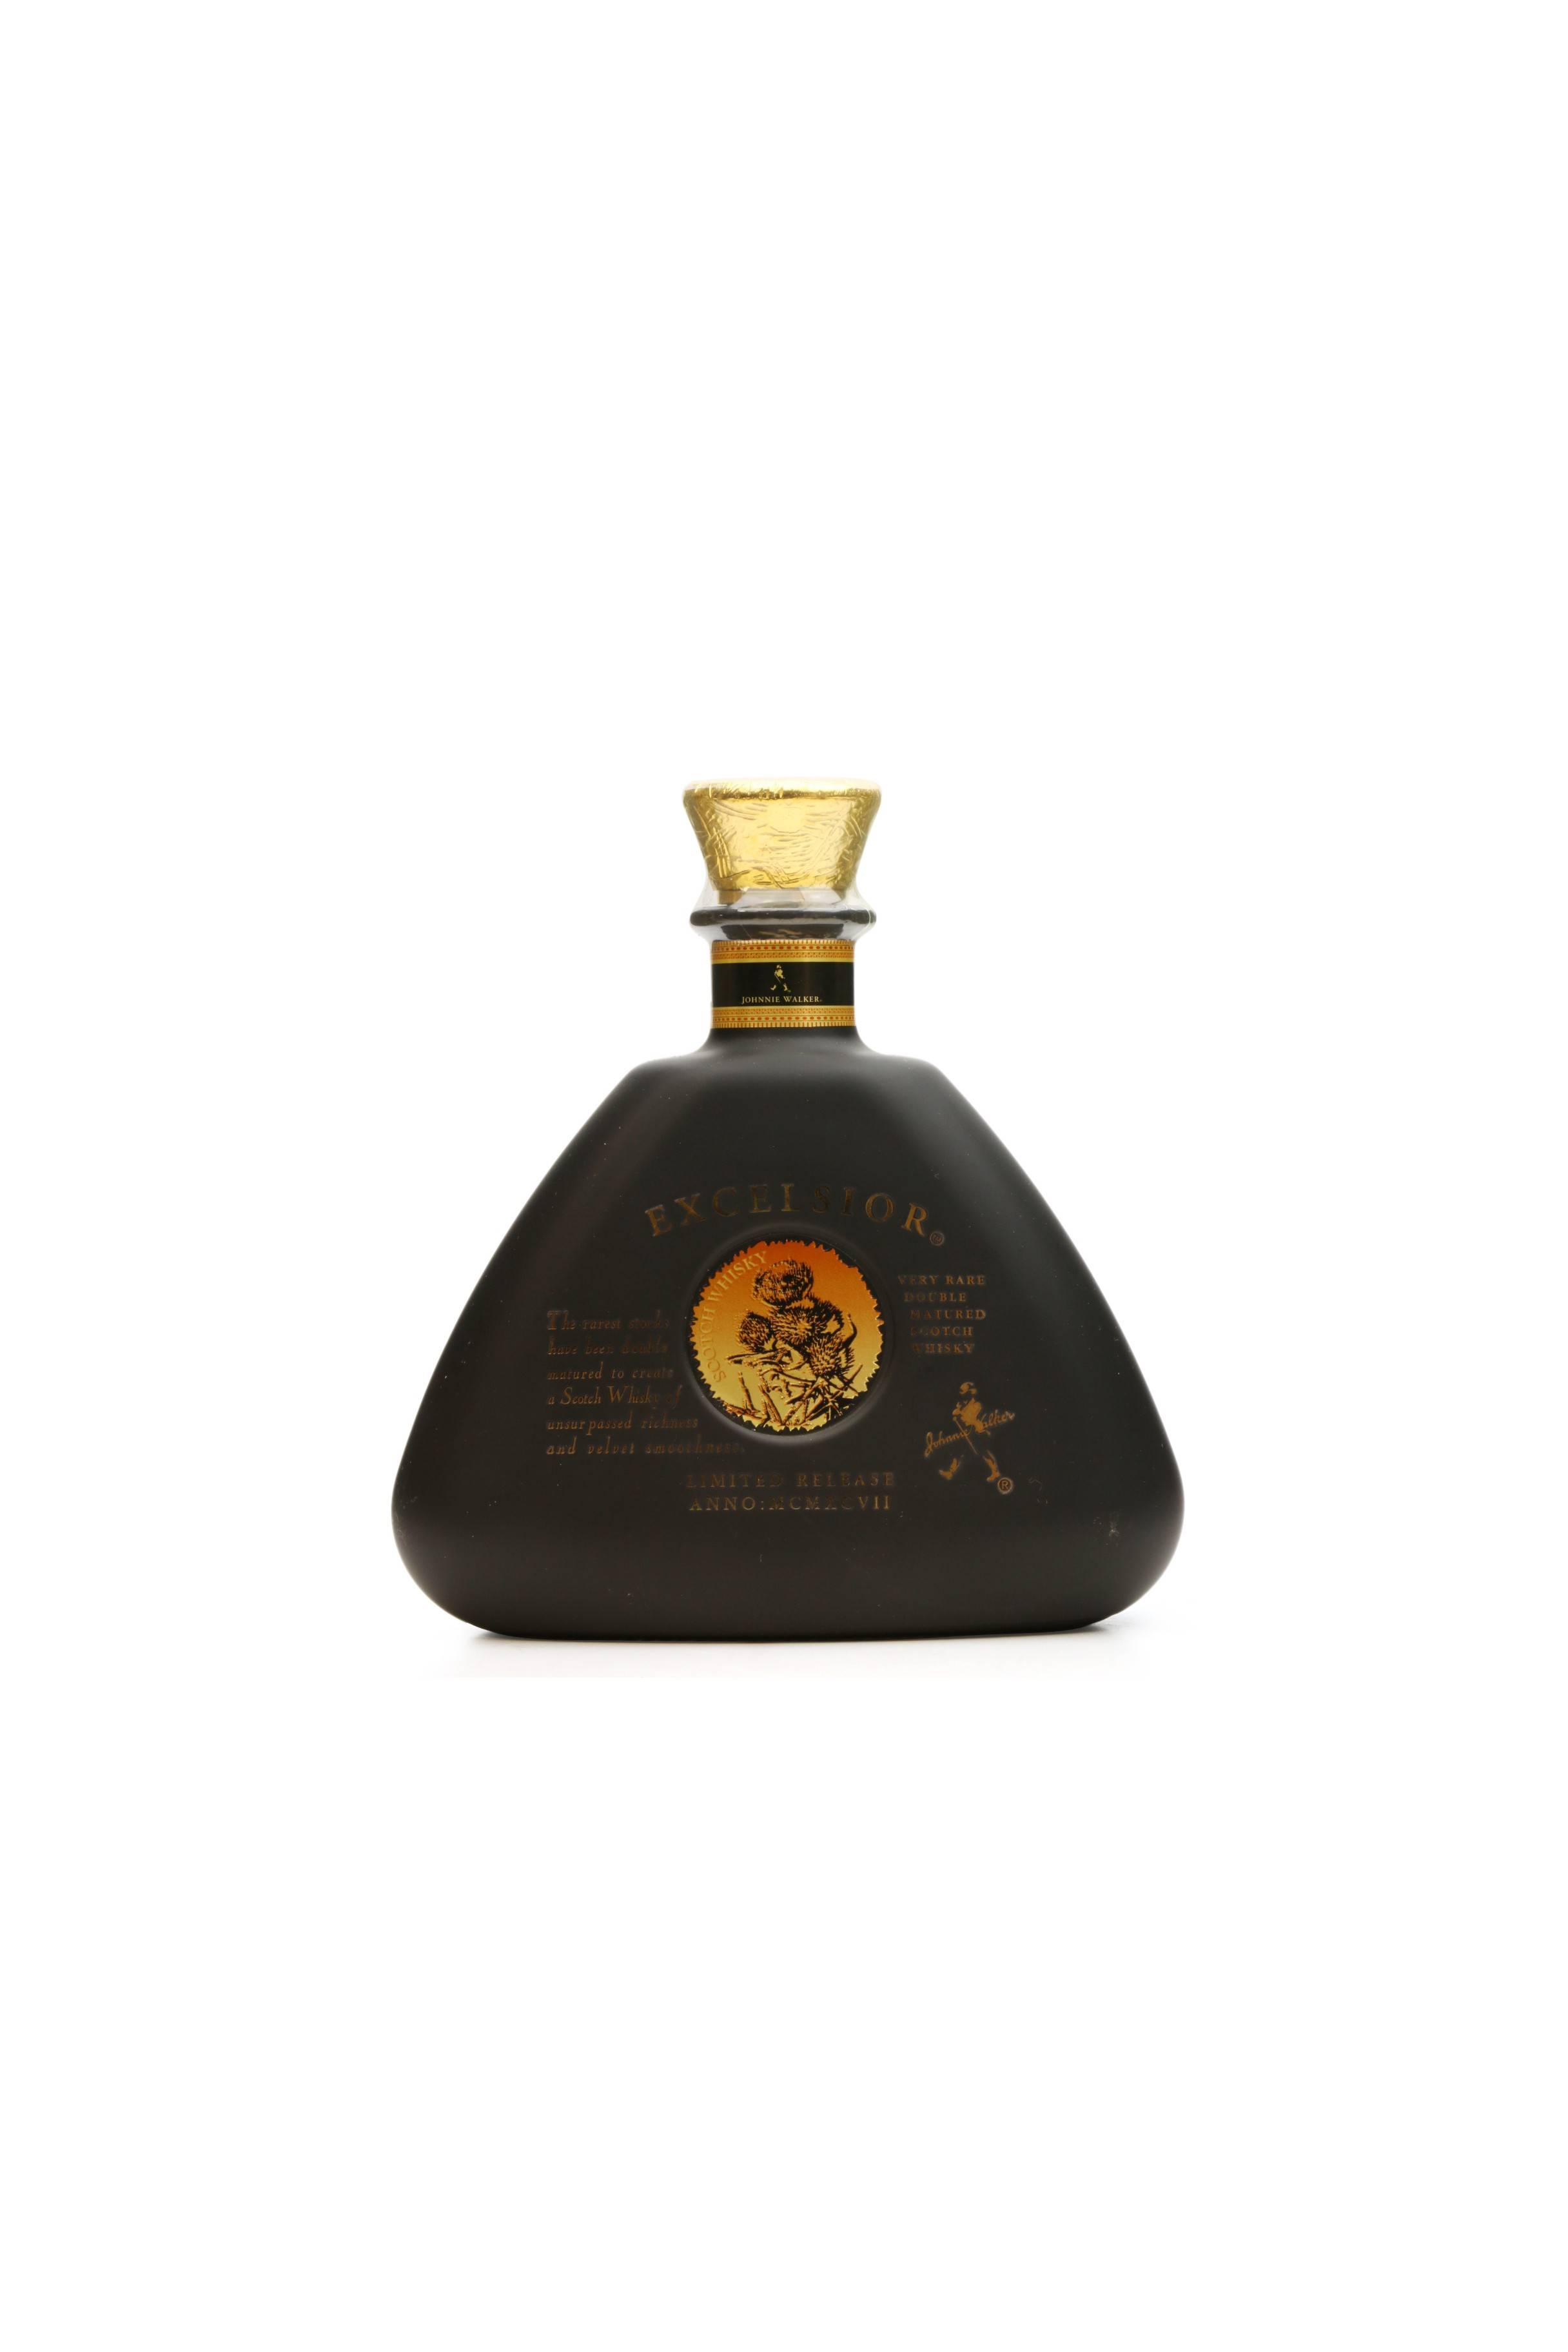 Johnnie Walker Excelsior Just Whisky Auctions 0475